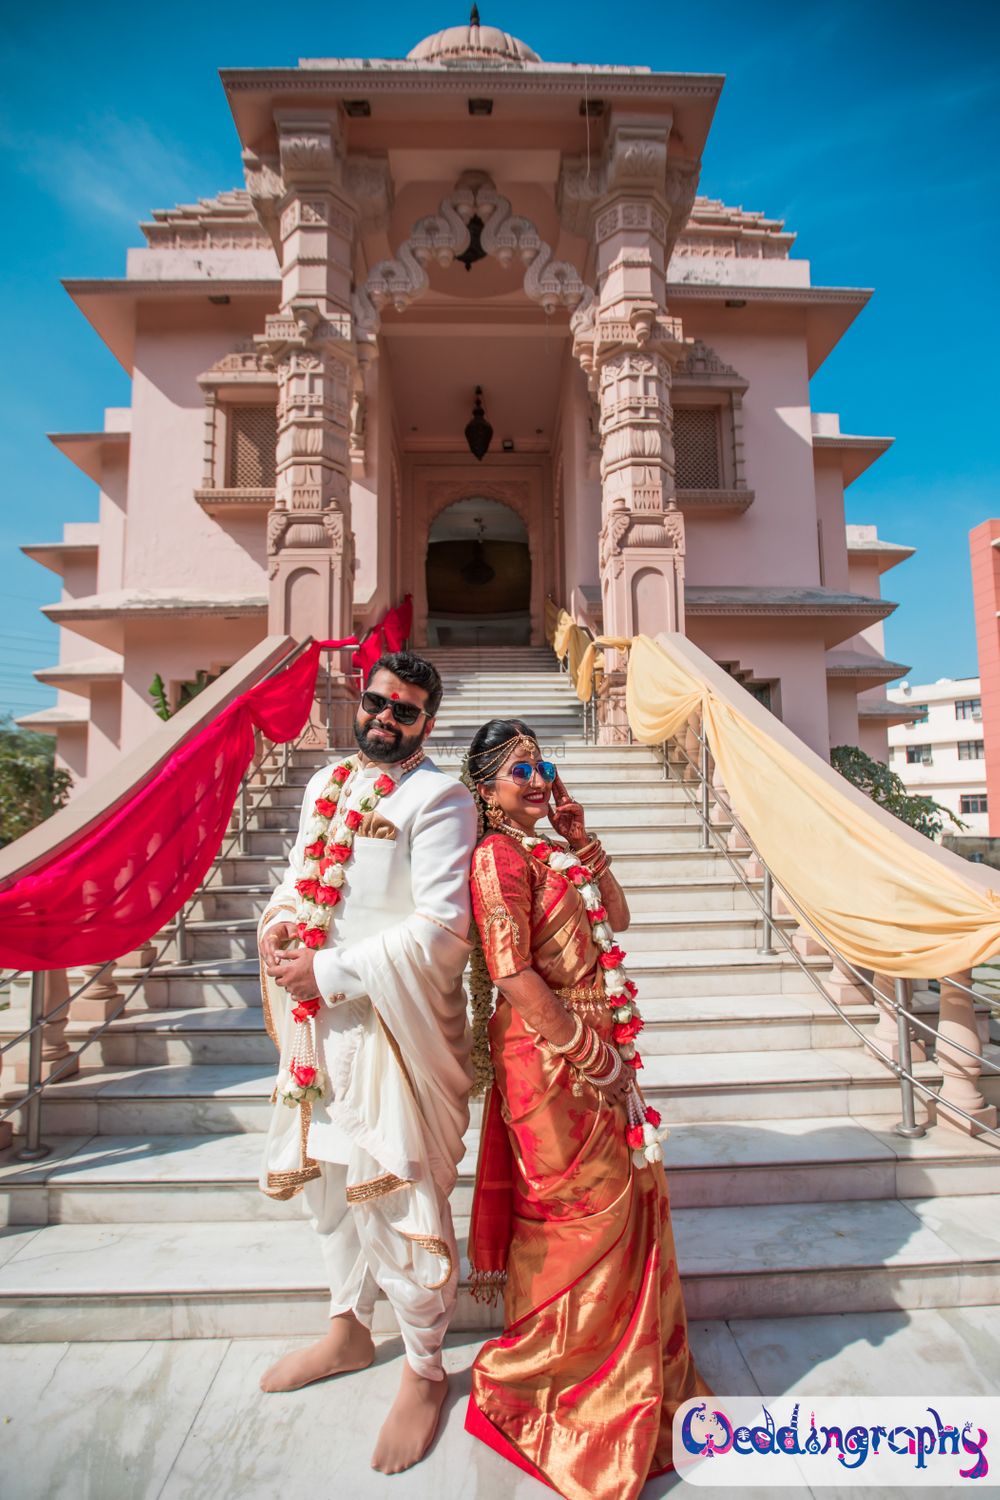 Photo From Sneha & Vivek Wedding - By Weddingraphy by M.O.M. Productions